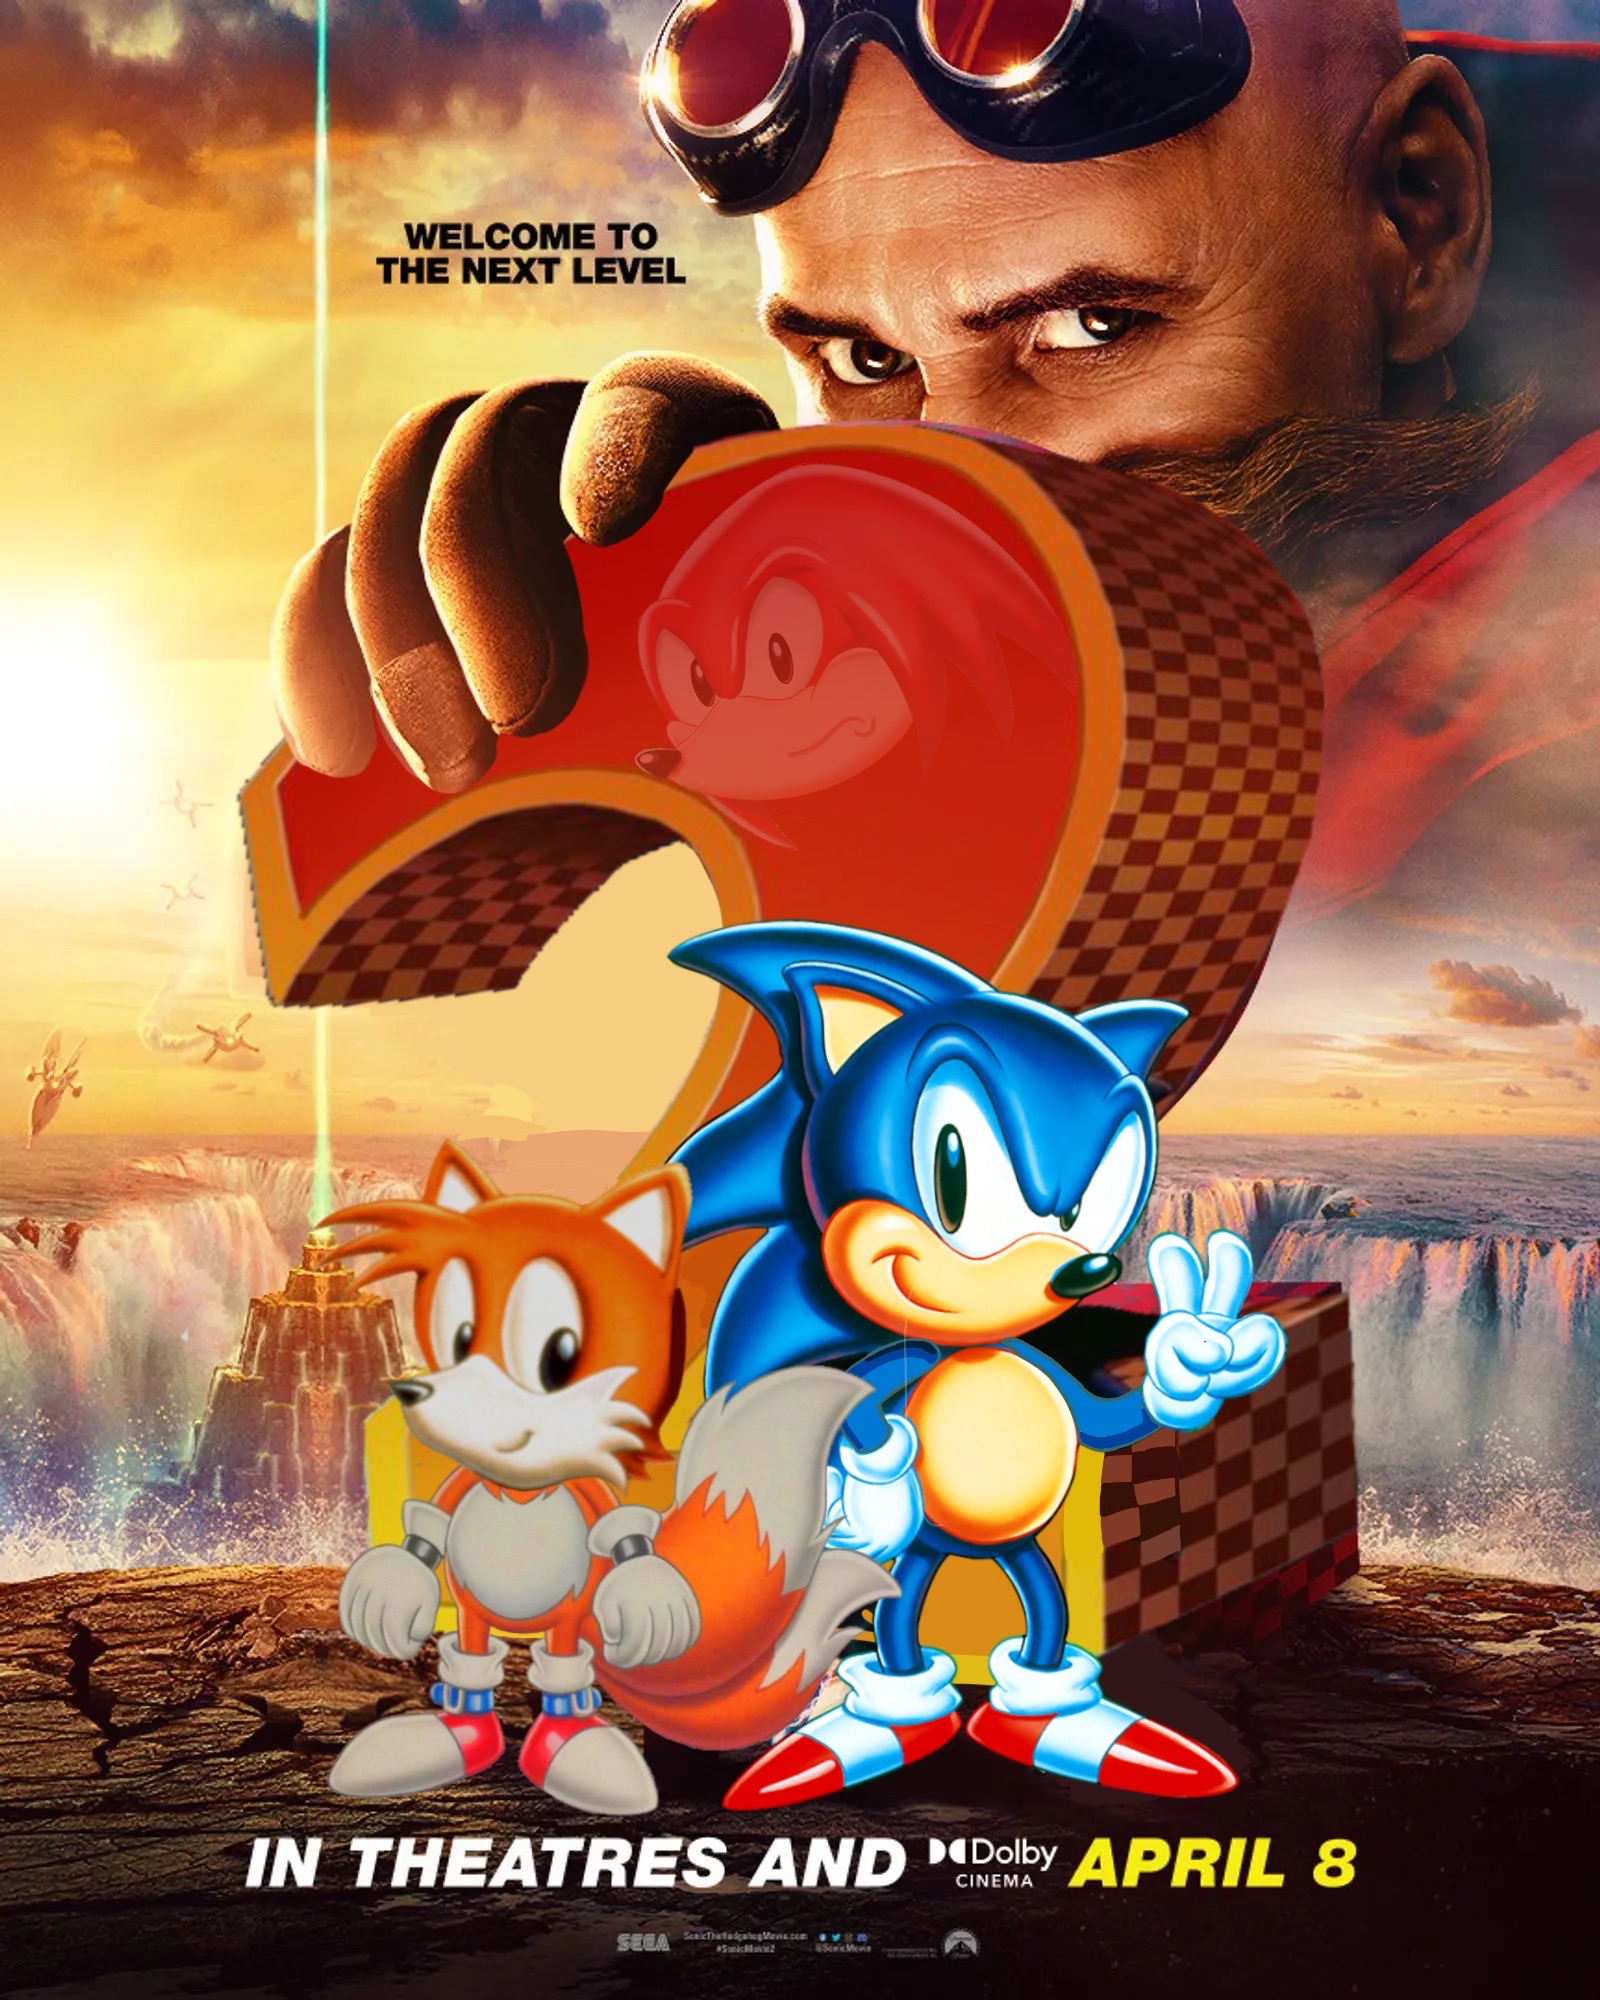 I Recreated The Sonic Movie 2 Poster! by RecraftedS on Newgrounds